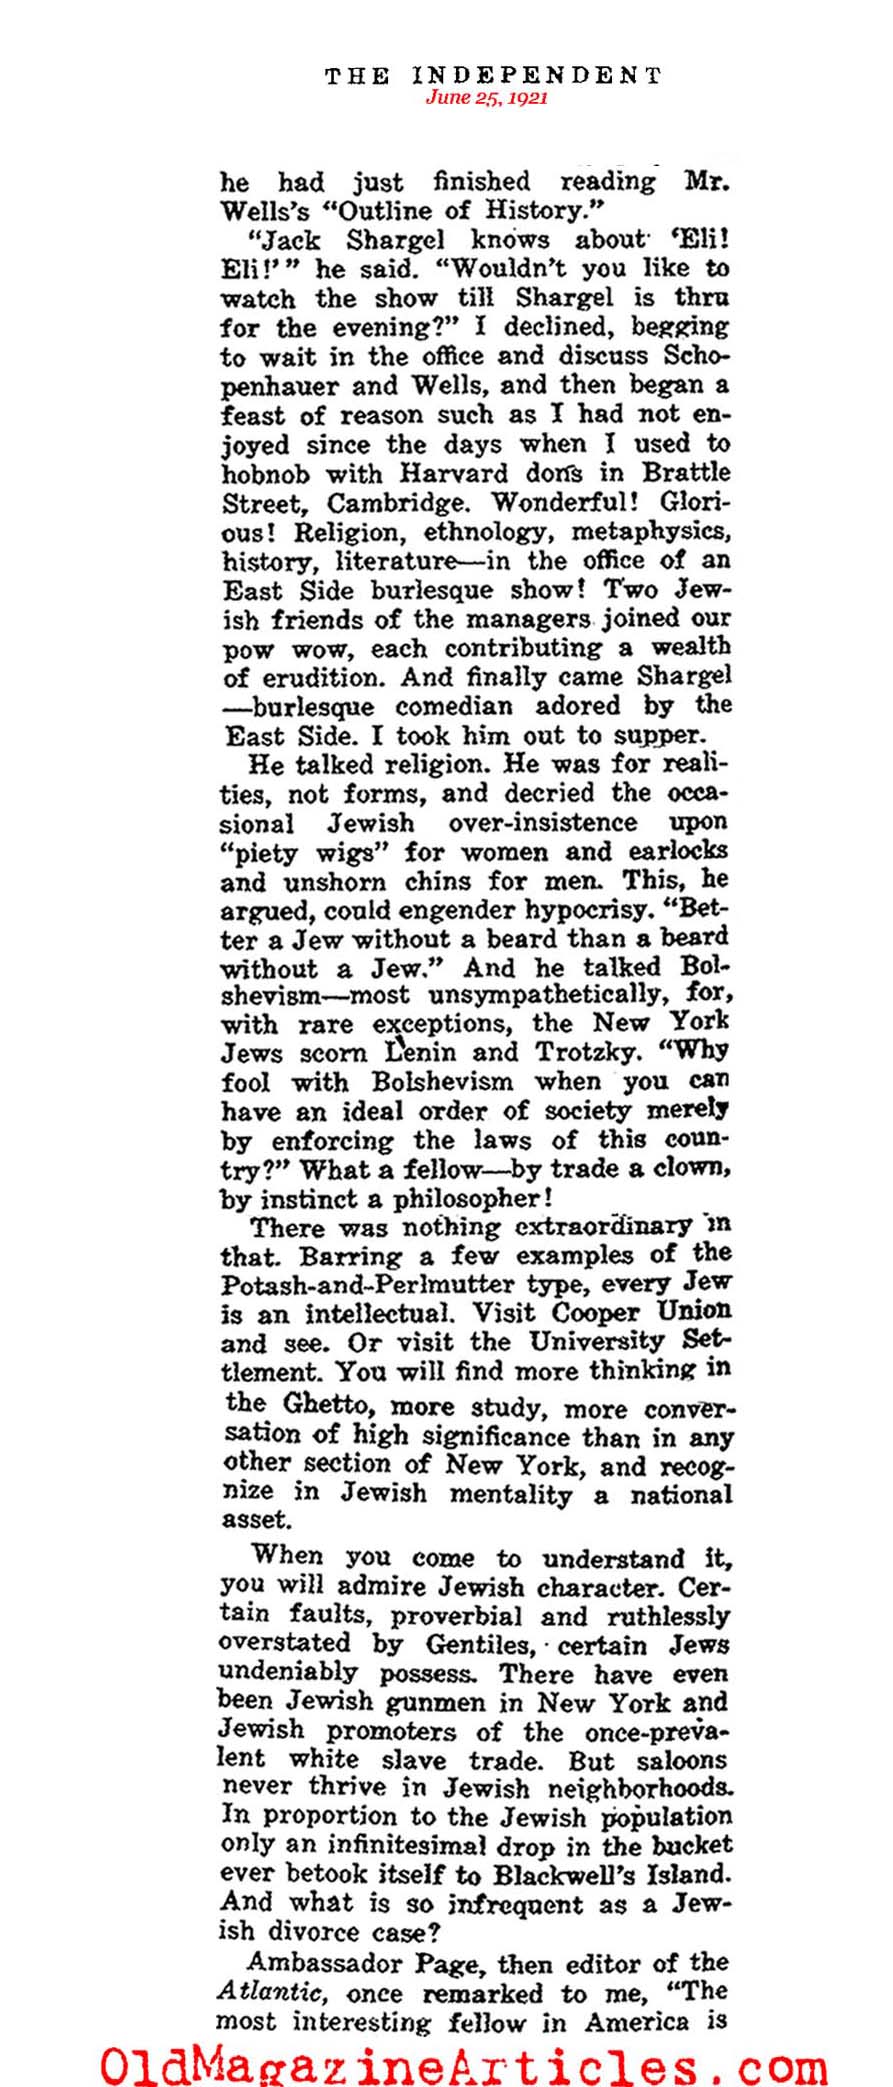 New York and the Real Jew (The Independent, 1921)